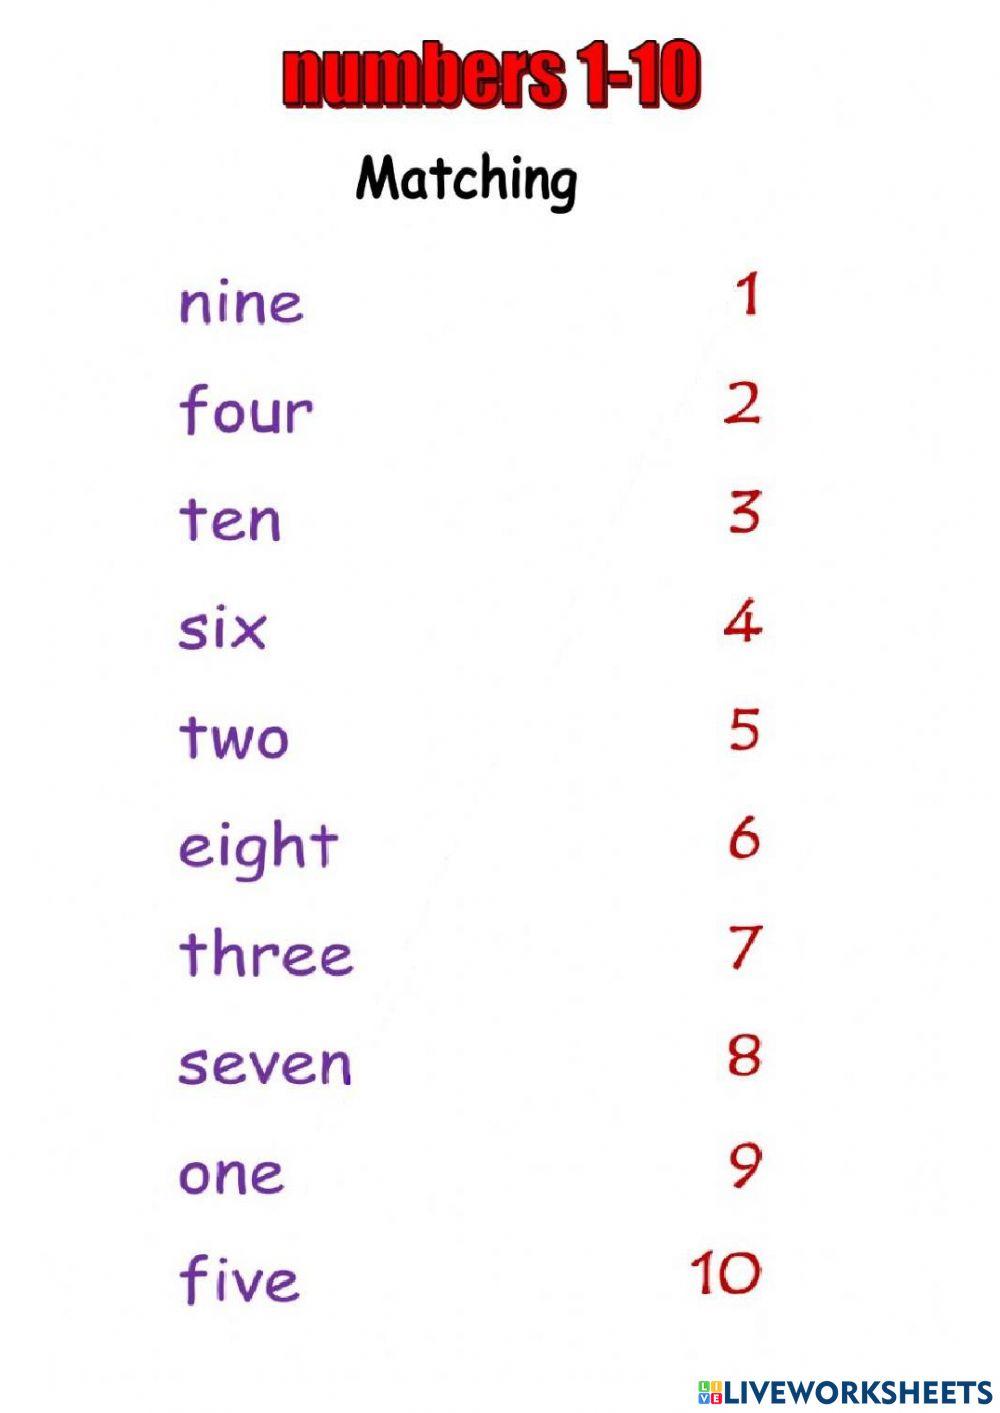 Numbers 0-10